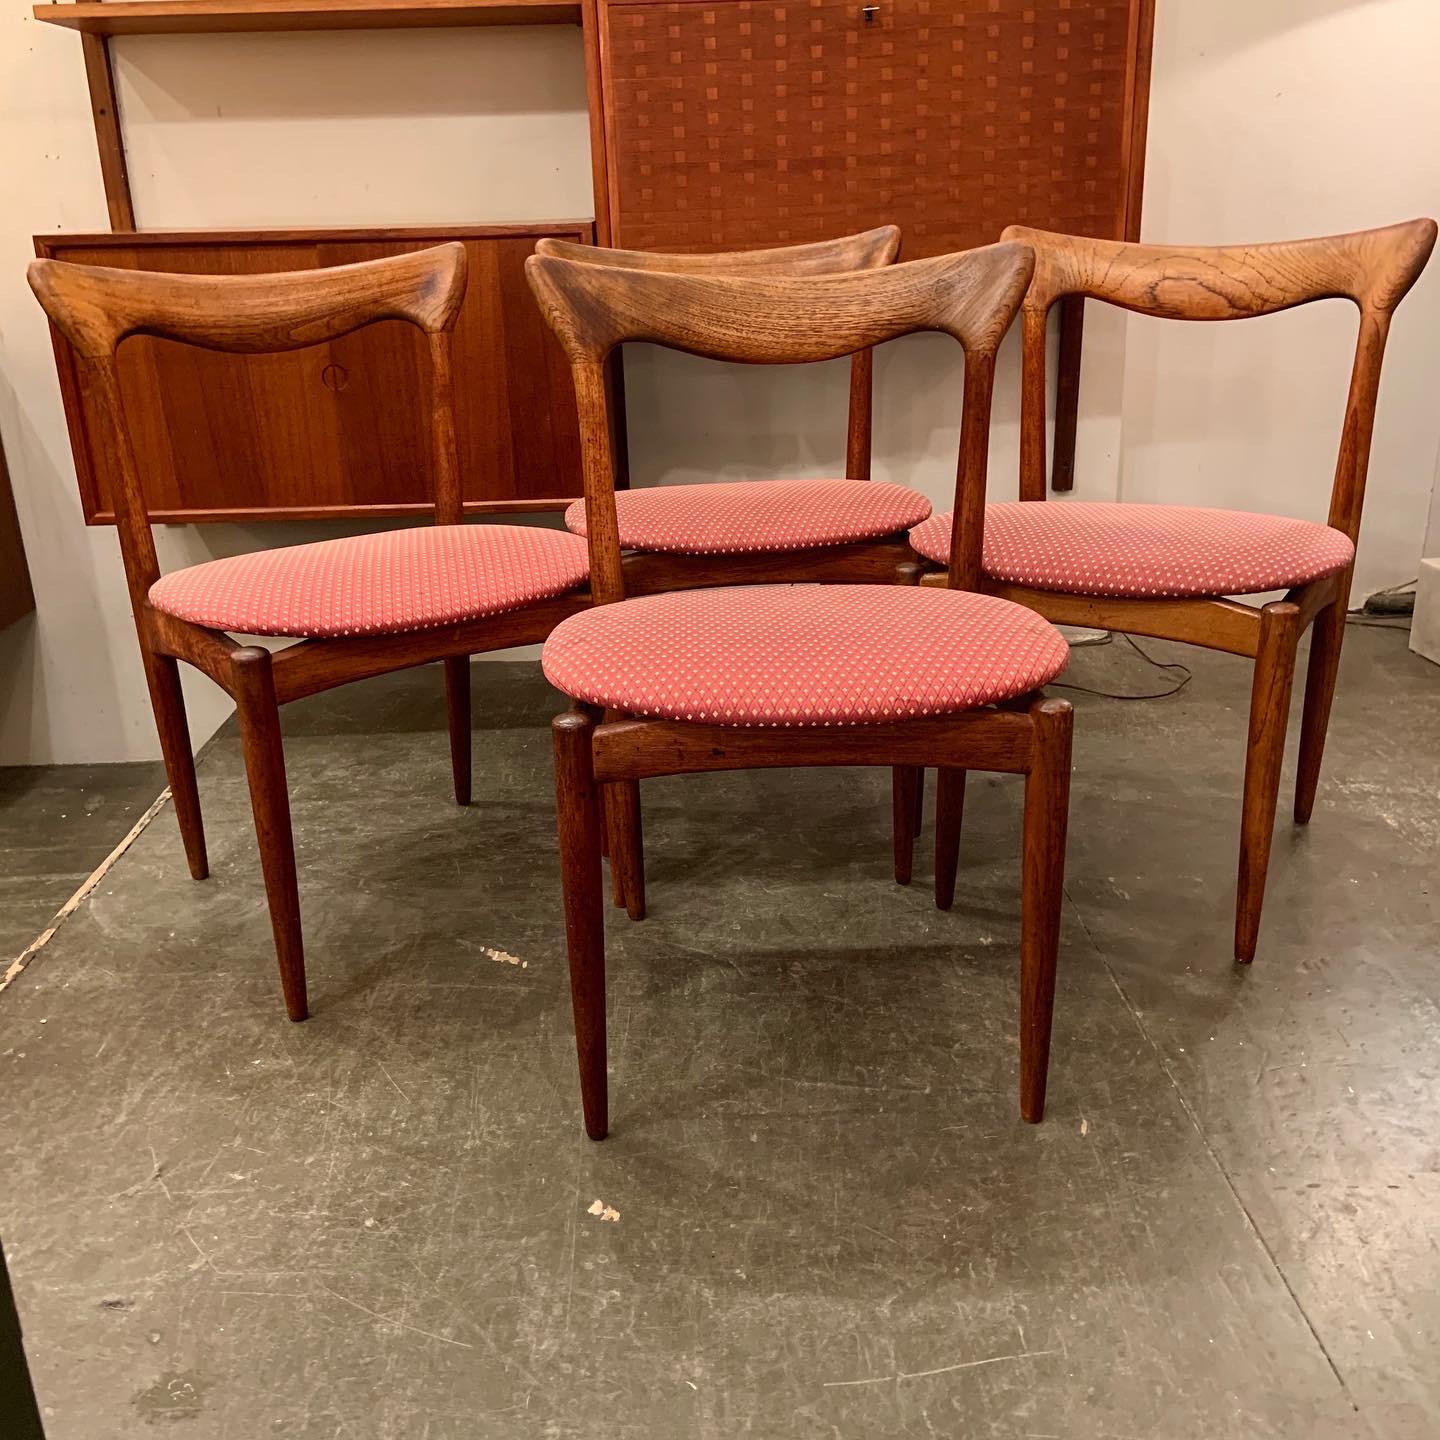 https://www.whitetrashnyc.com/wp-content/uploads/2020/03/h-w-klein-sculpted-back-dining-chairs-of-walnut-set-of-4-2263.jpeg